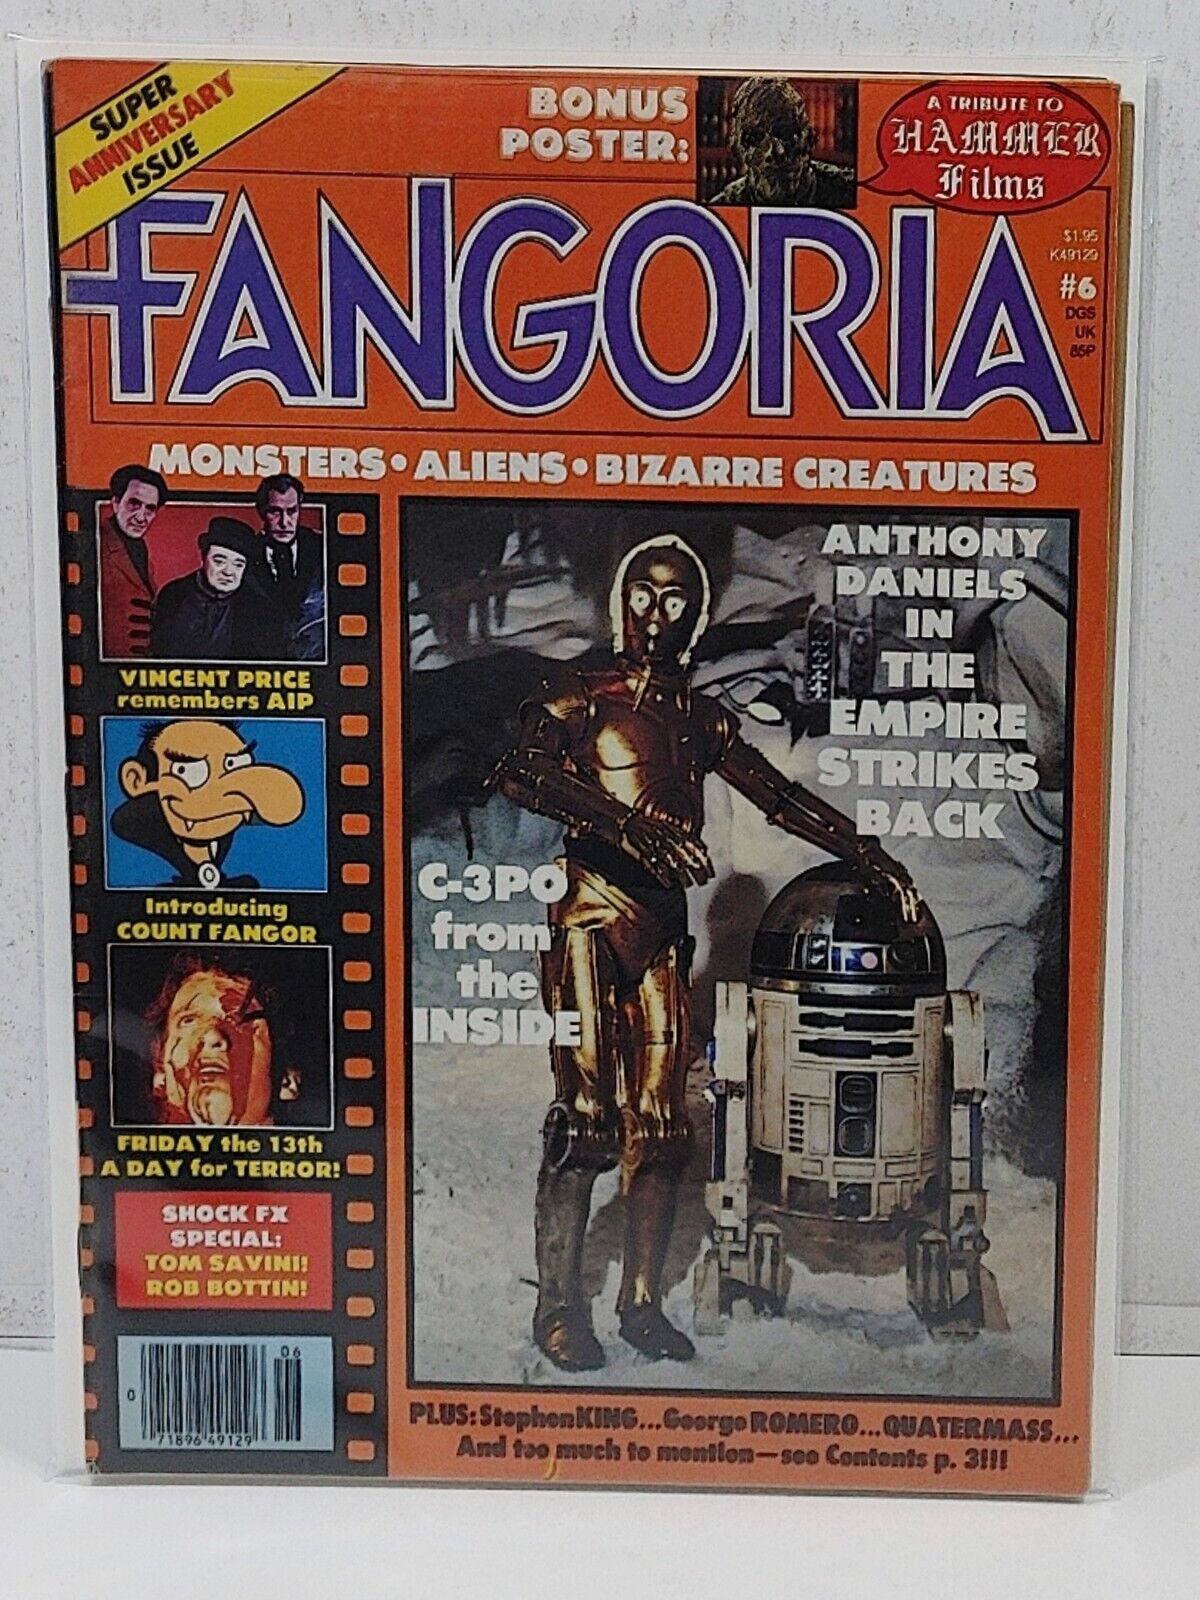 FANGORIA VINTAGE MAGAZINE 80s HORROR STAR WARS EMPIRE FRIDAY THE 13TH ISSUE #6